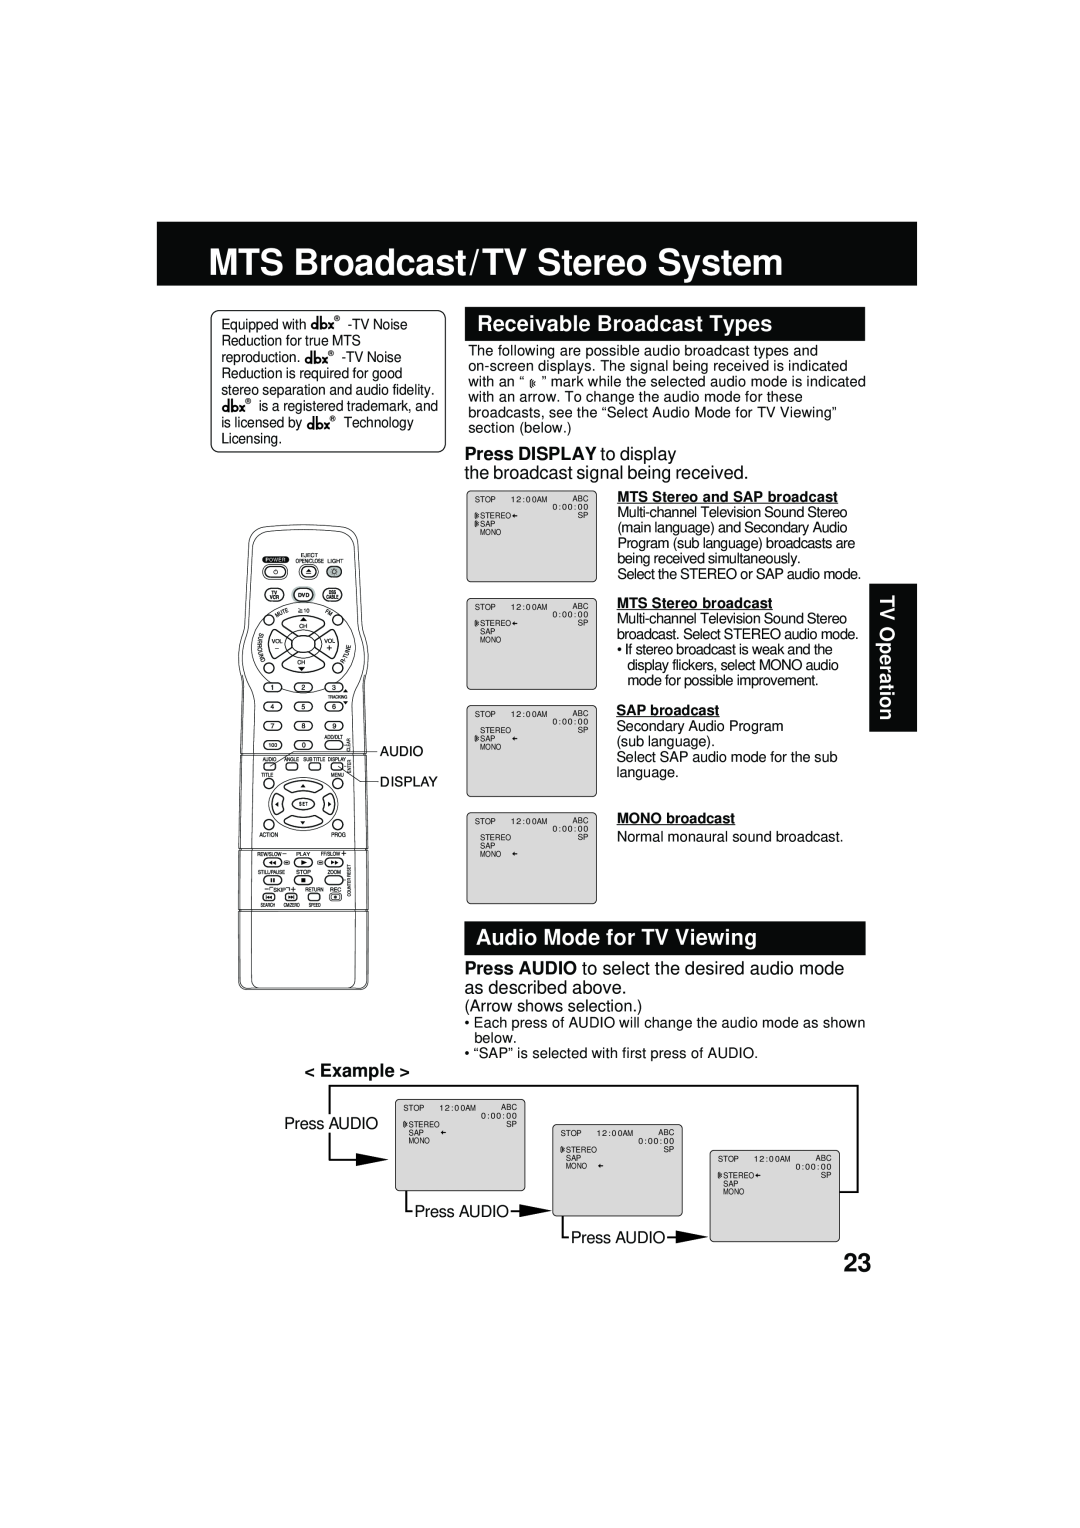 Panasonic PV DM2092 MTS Broadcast/TV Stereo System, Receivable Broadcast Types, Audio Mode for TV Viewing, TV Operation 